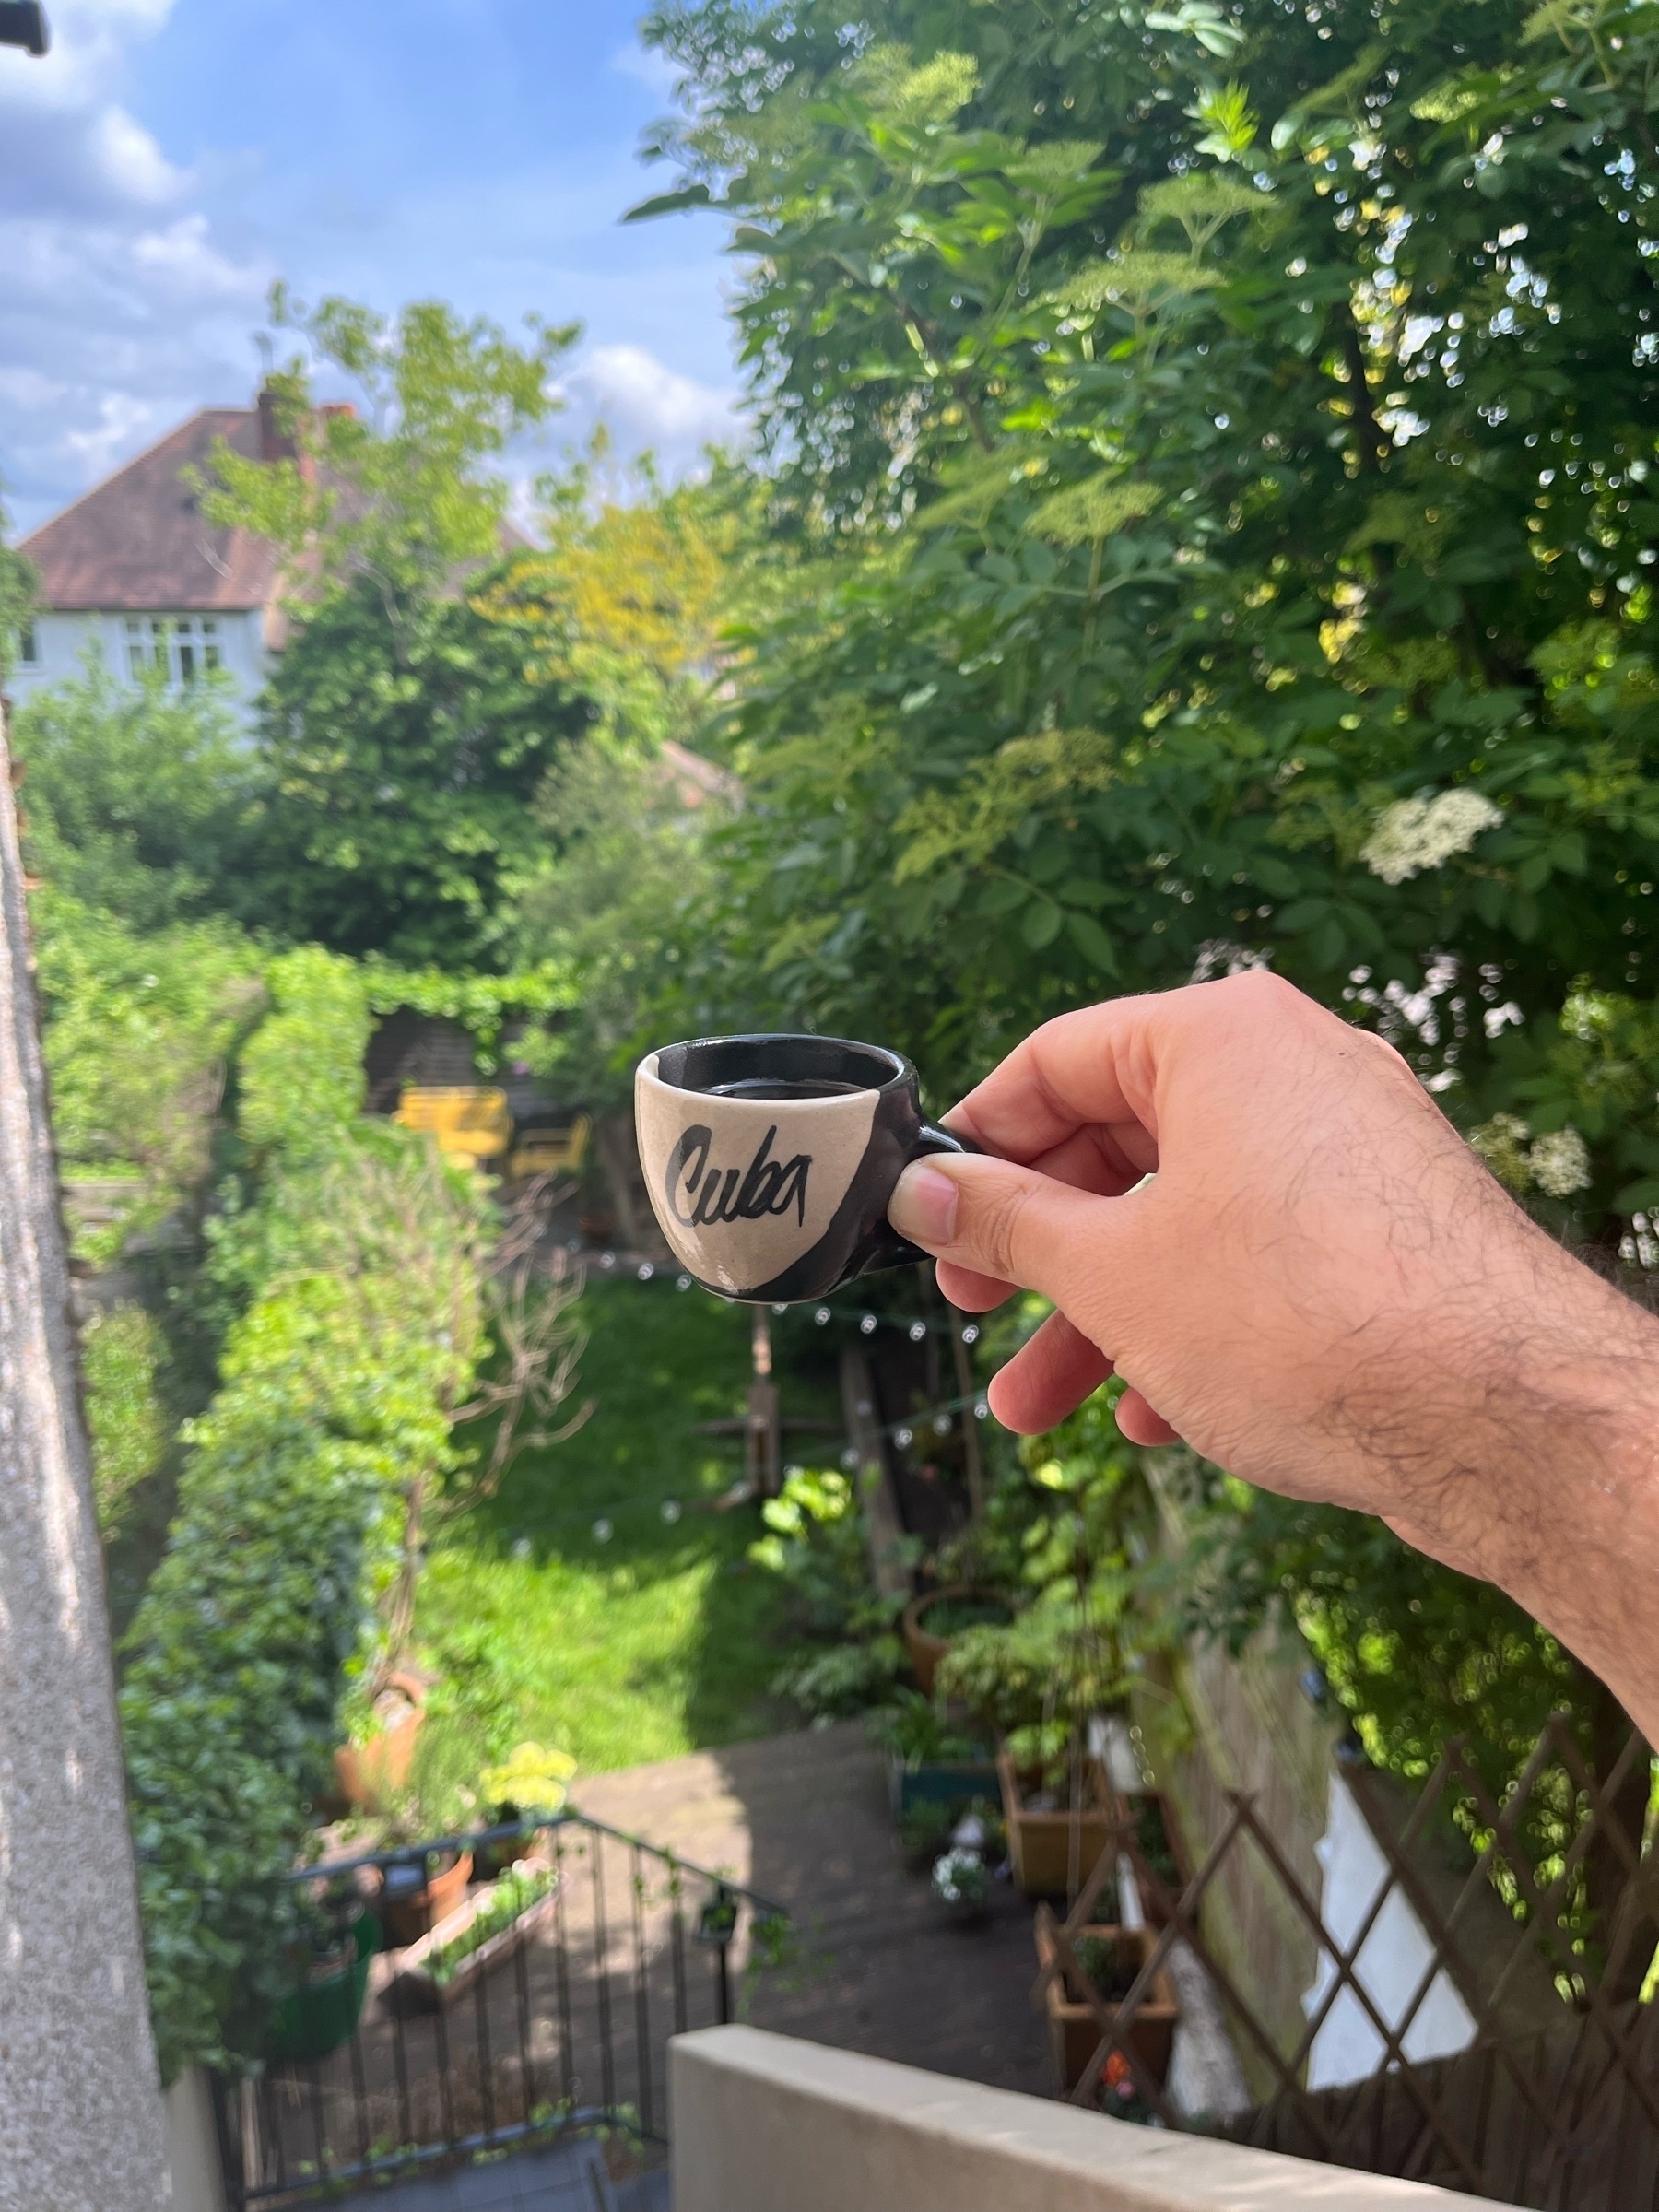 Hand holding small cup that says Cuba overlooking at a green garden on a sunny day